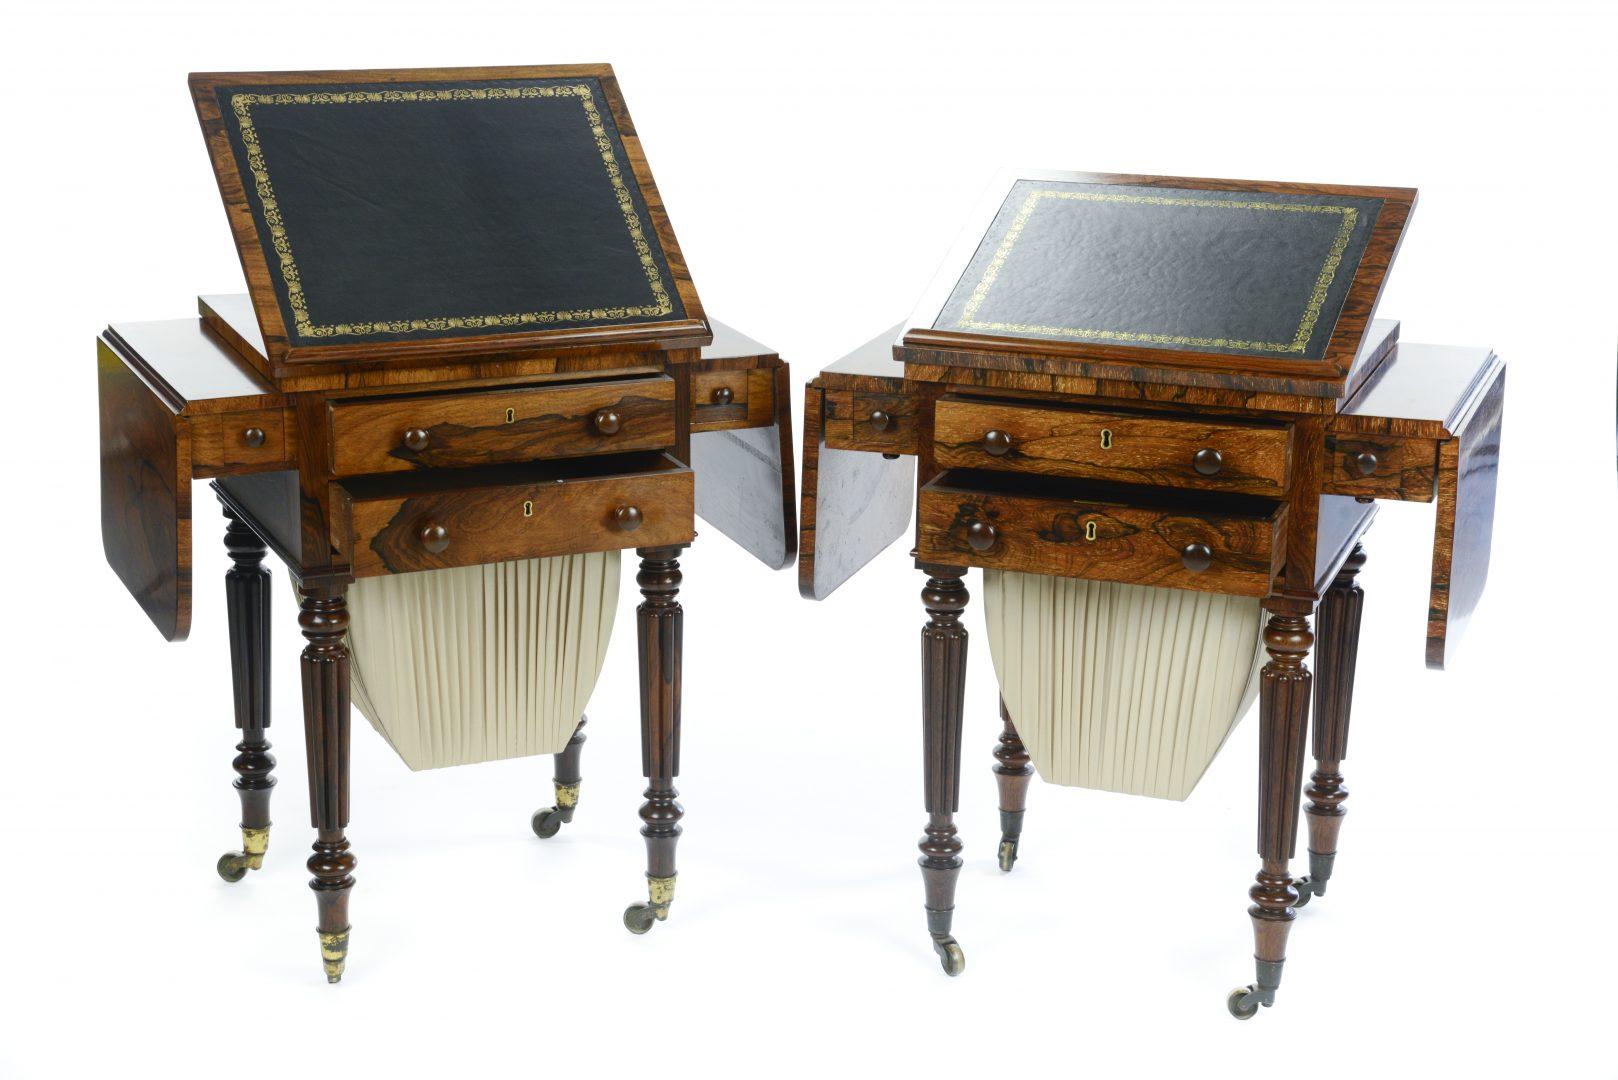 Regency Gillows of London and Lancaster a Matched Pair of Rosewood Worktables